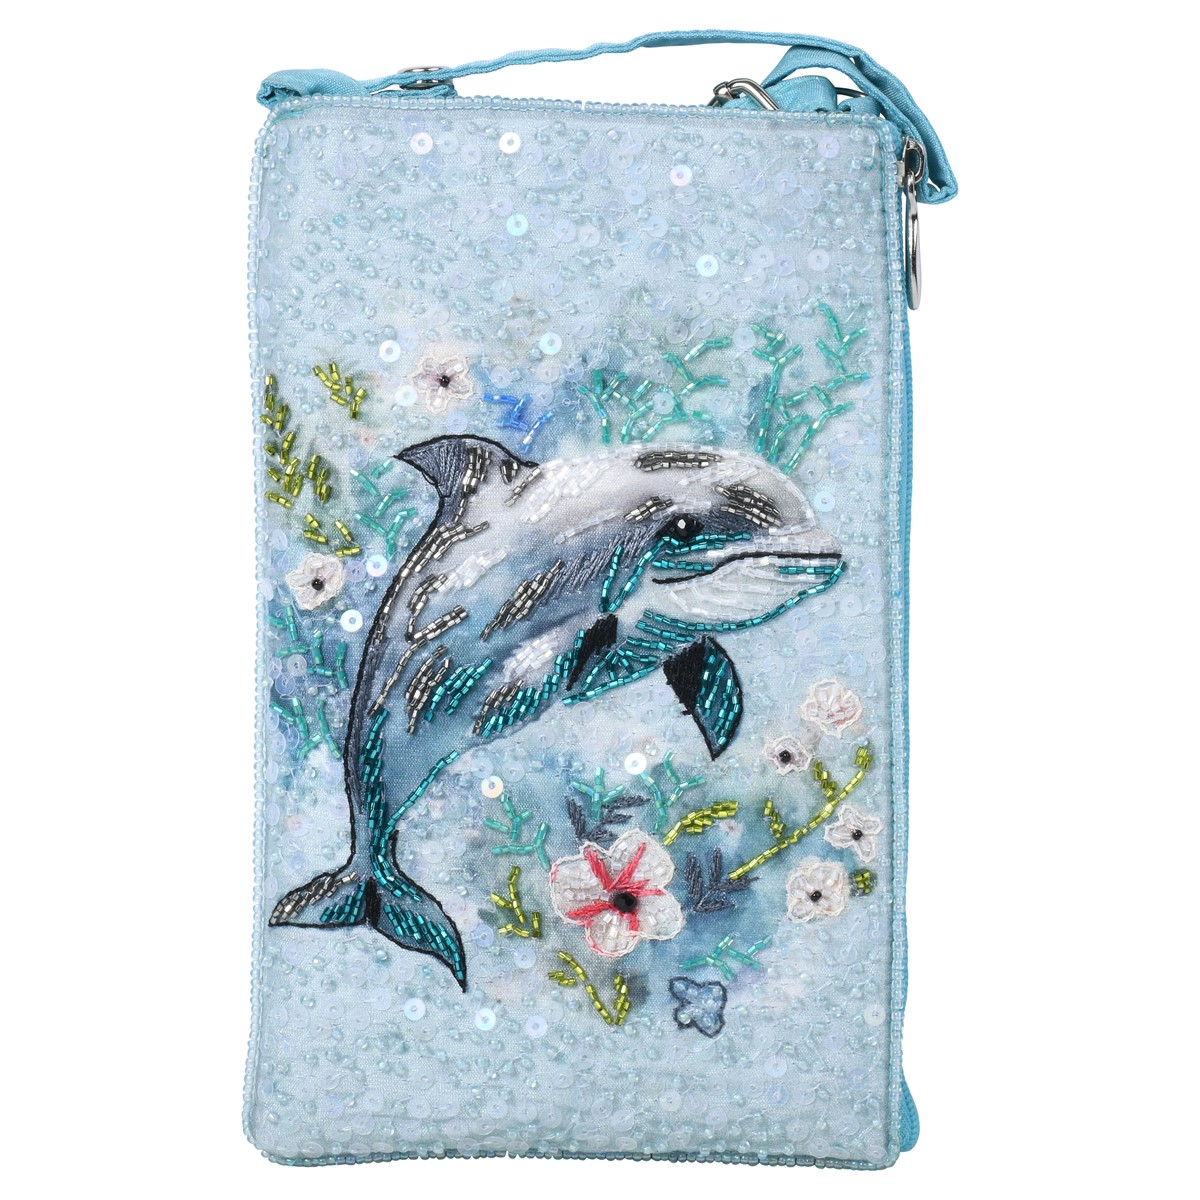 Dolphin Bags